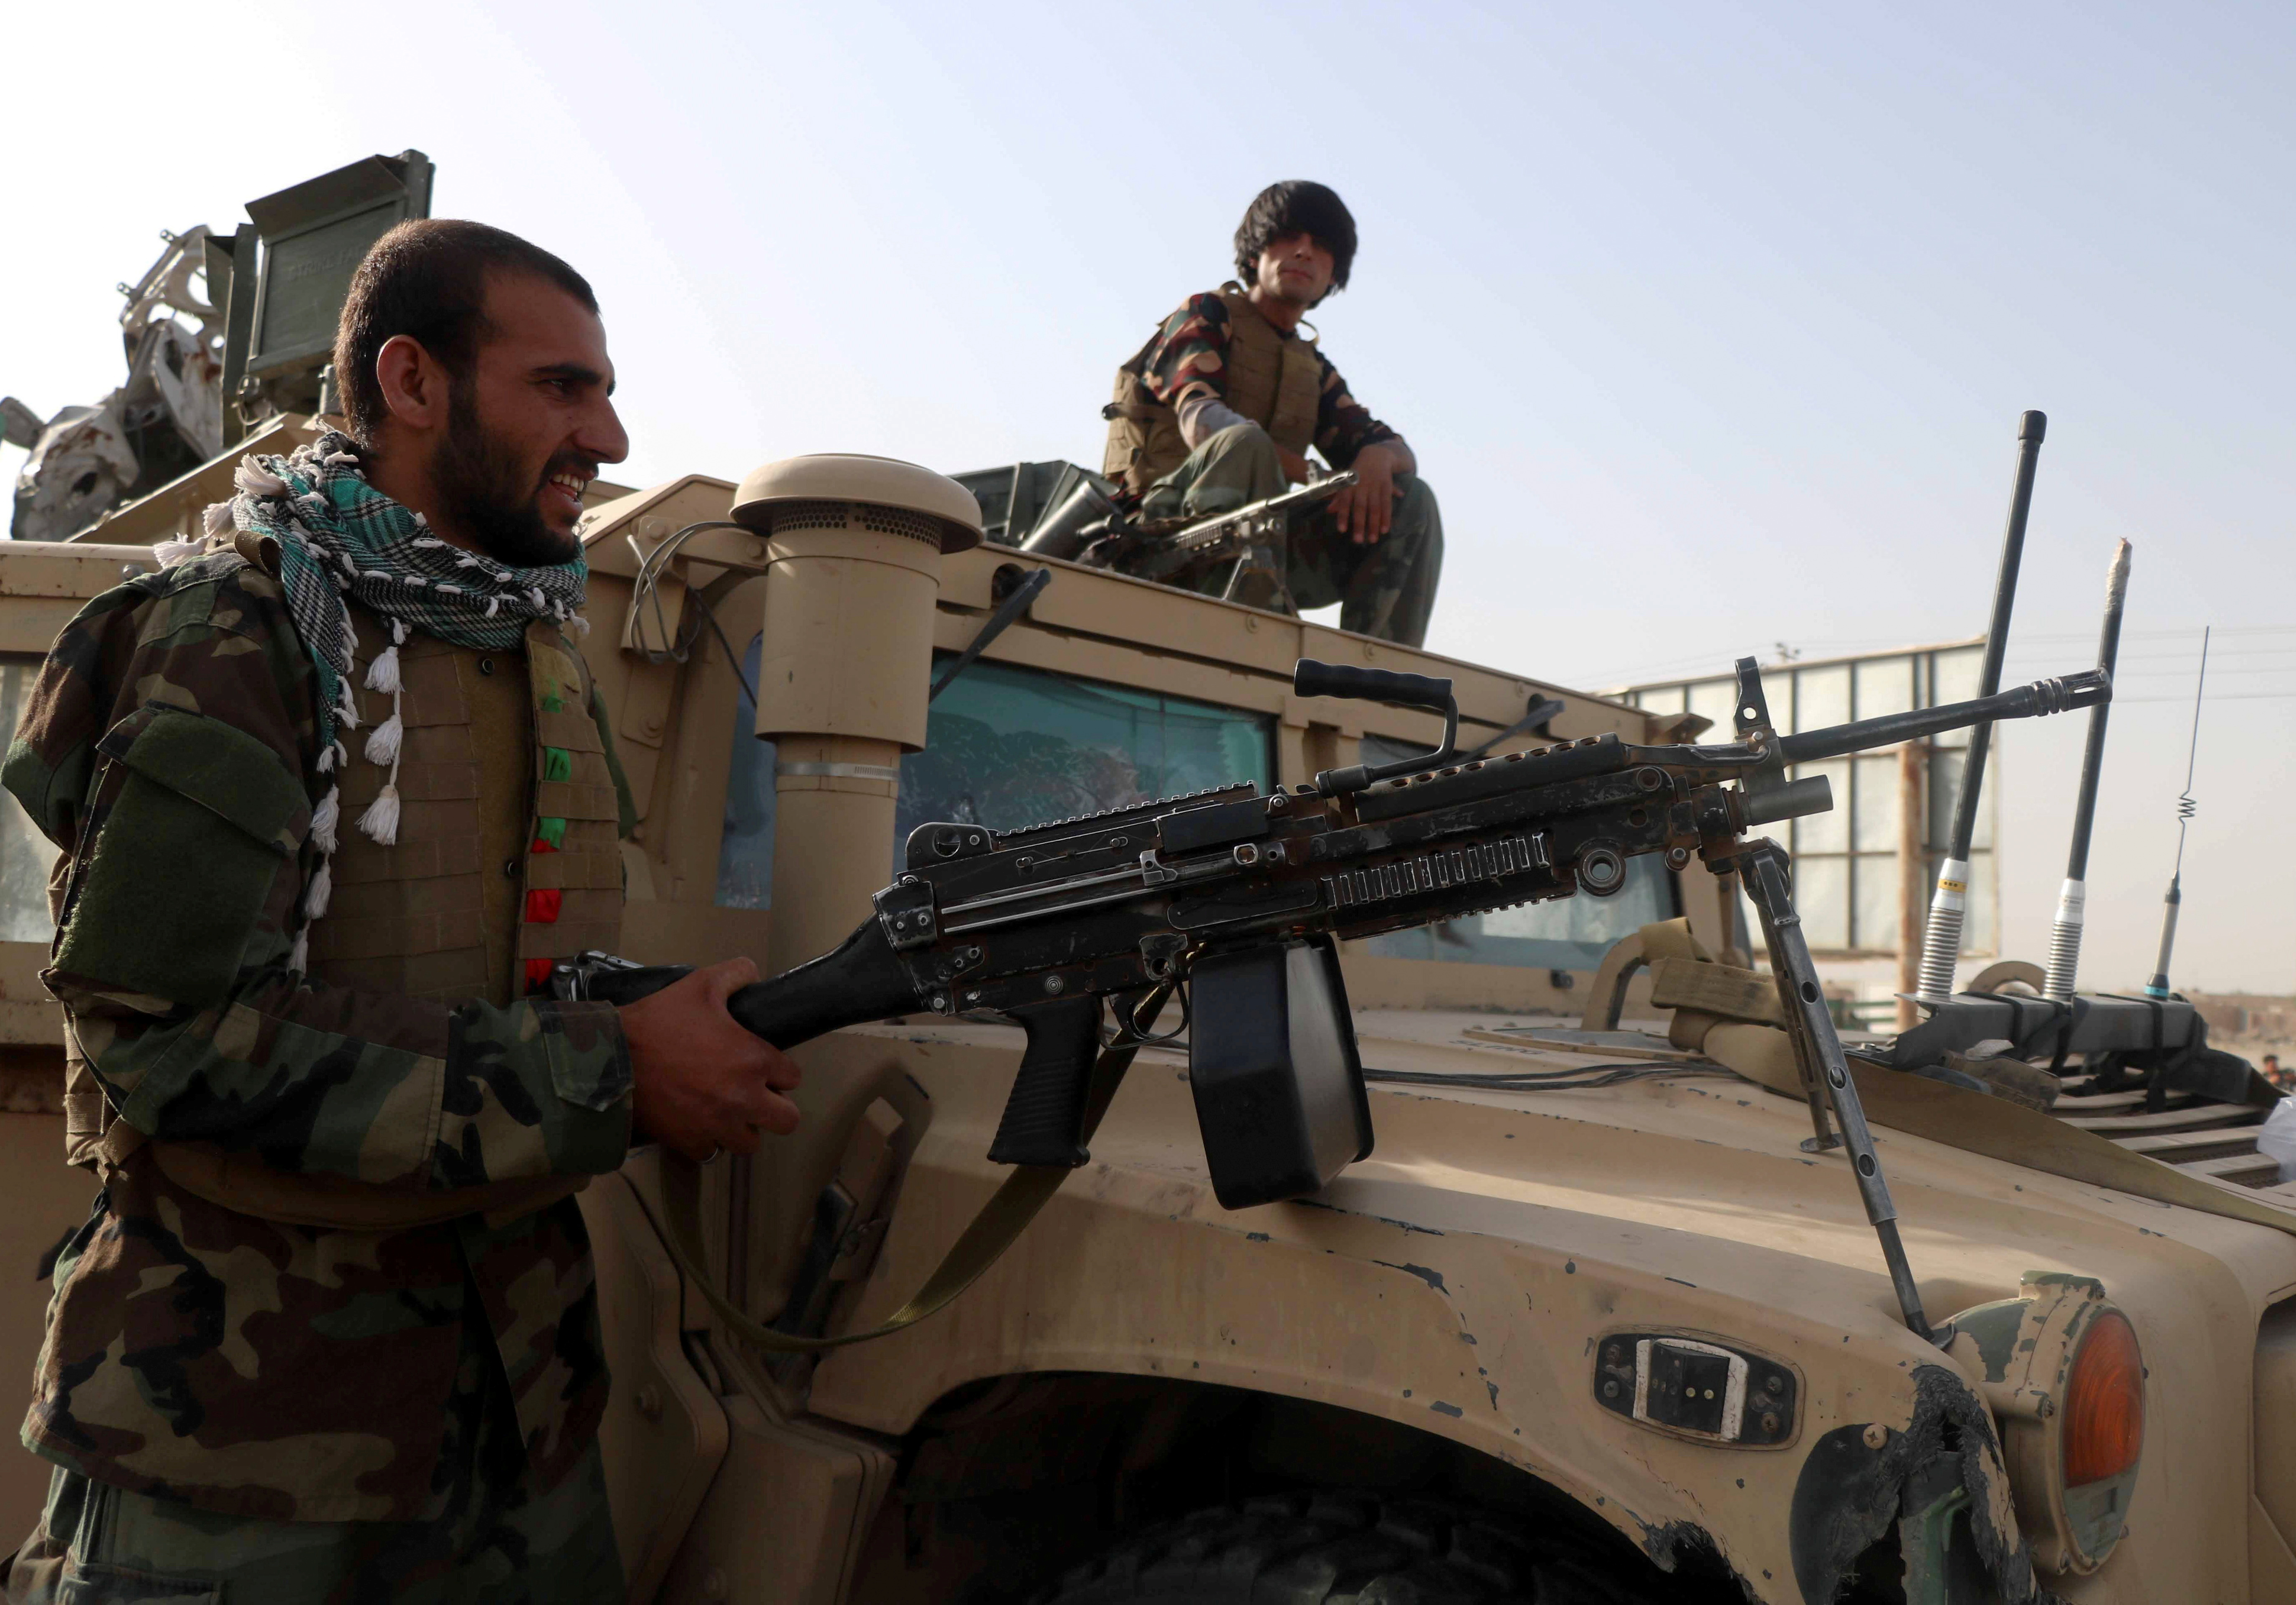 Afghan National Army soldiers keep watch at checkpoint in Guzara district of Herat province